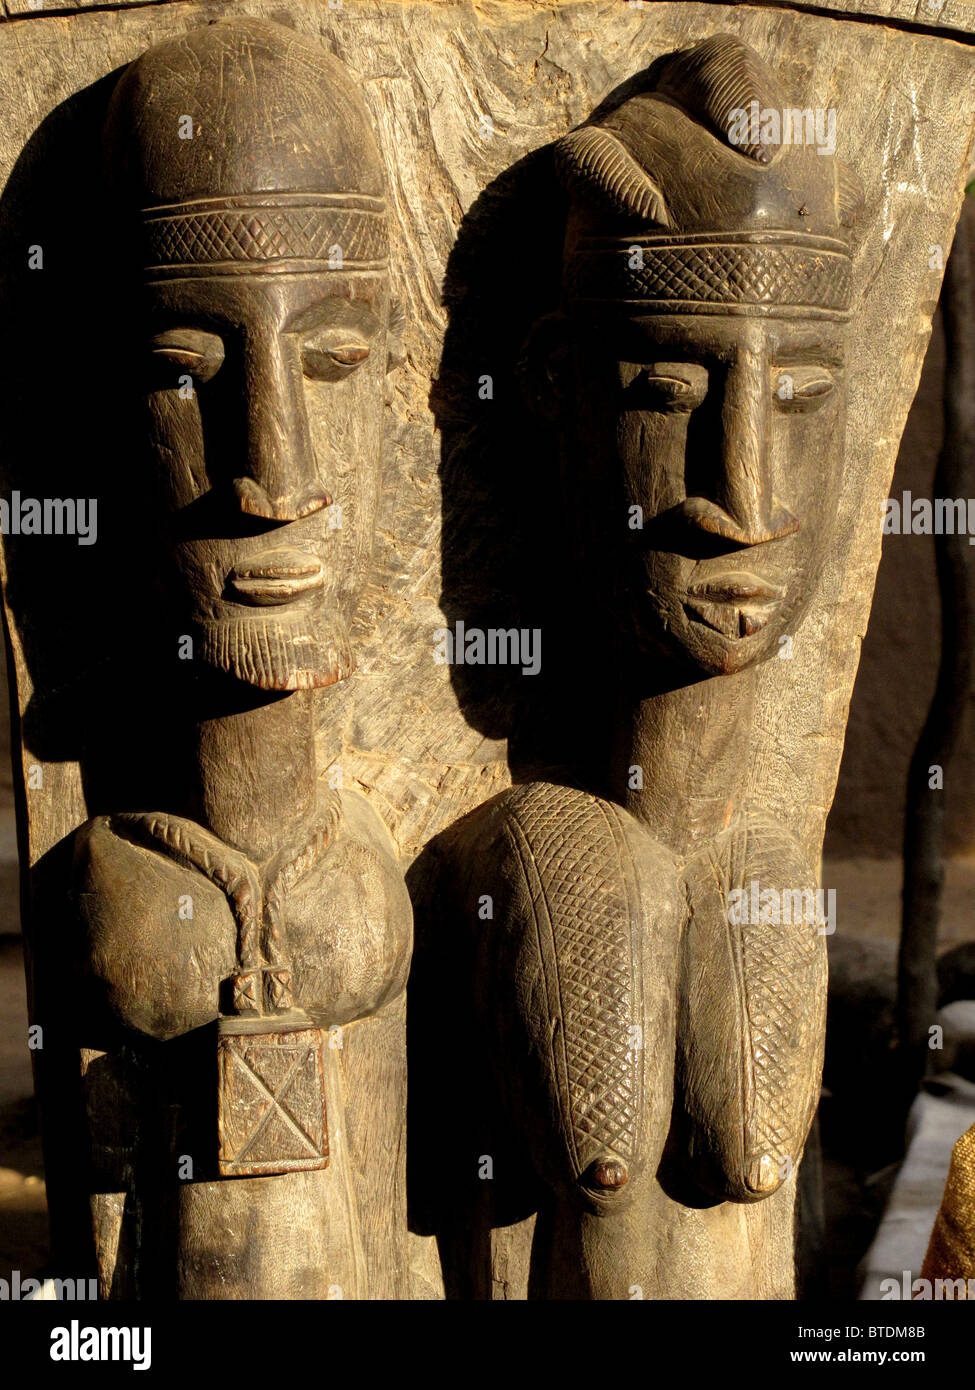 Close-up of a wooden carving showing a male and a female figure Stock Photo